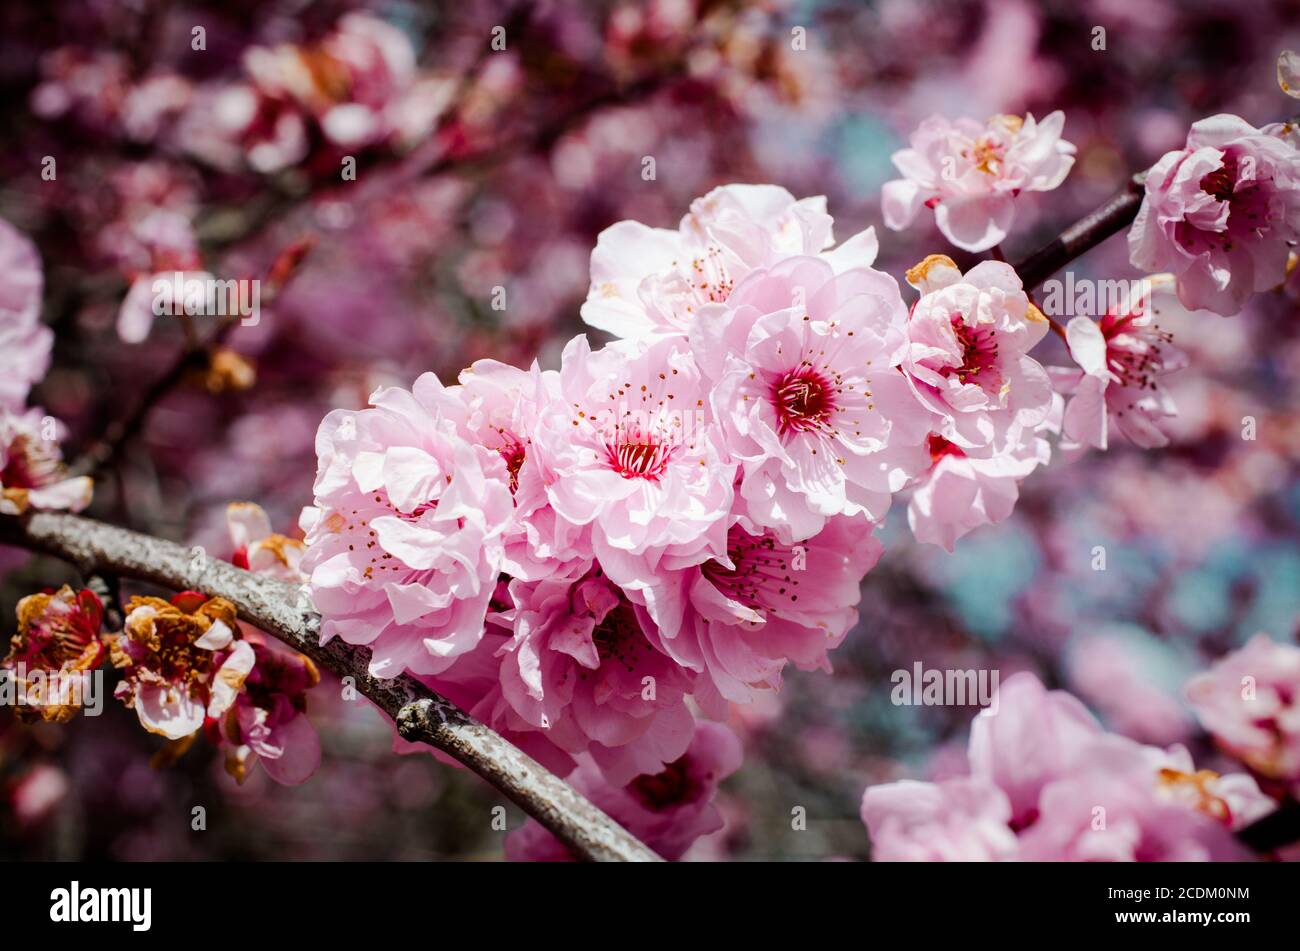 New Zealand Countryside, iconic kiwi scenes: Plum Trees resplendent with Spring Blossoms. Stock Photo